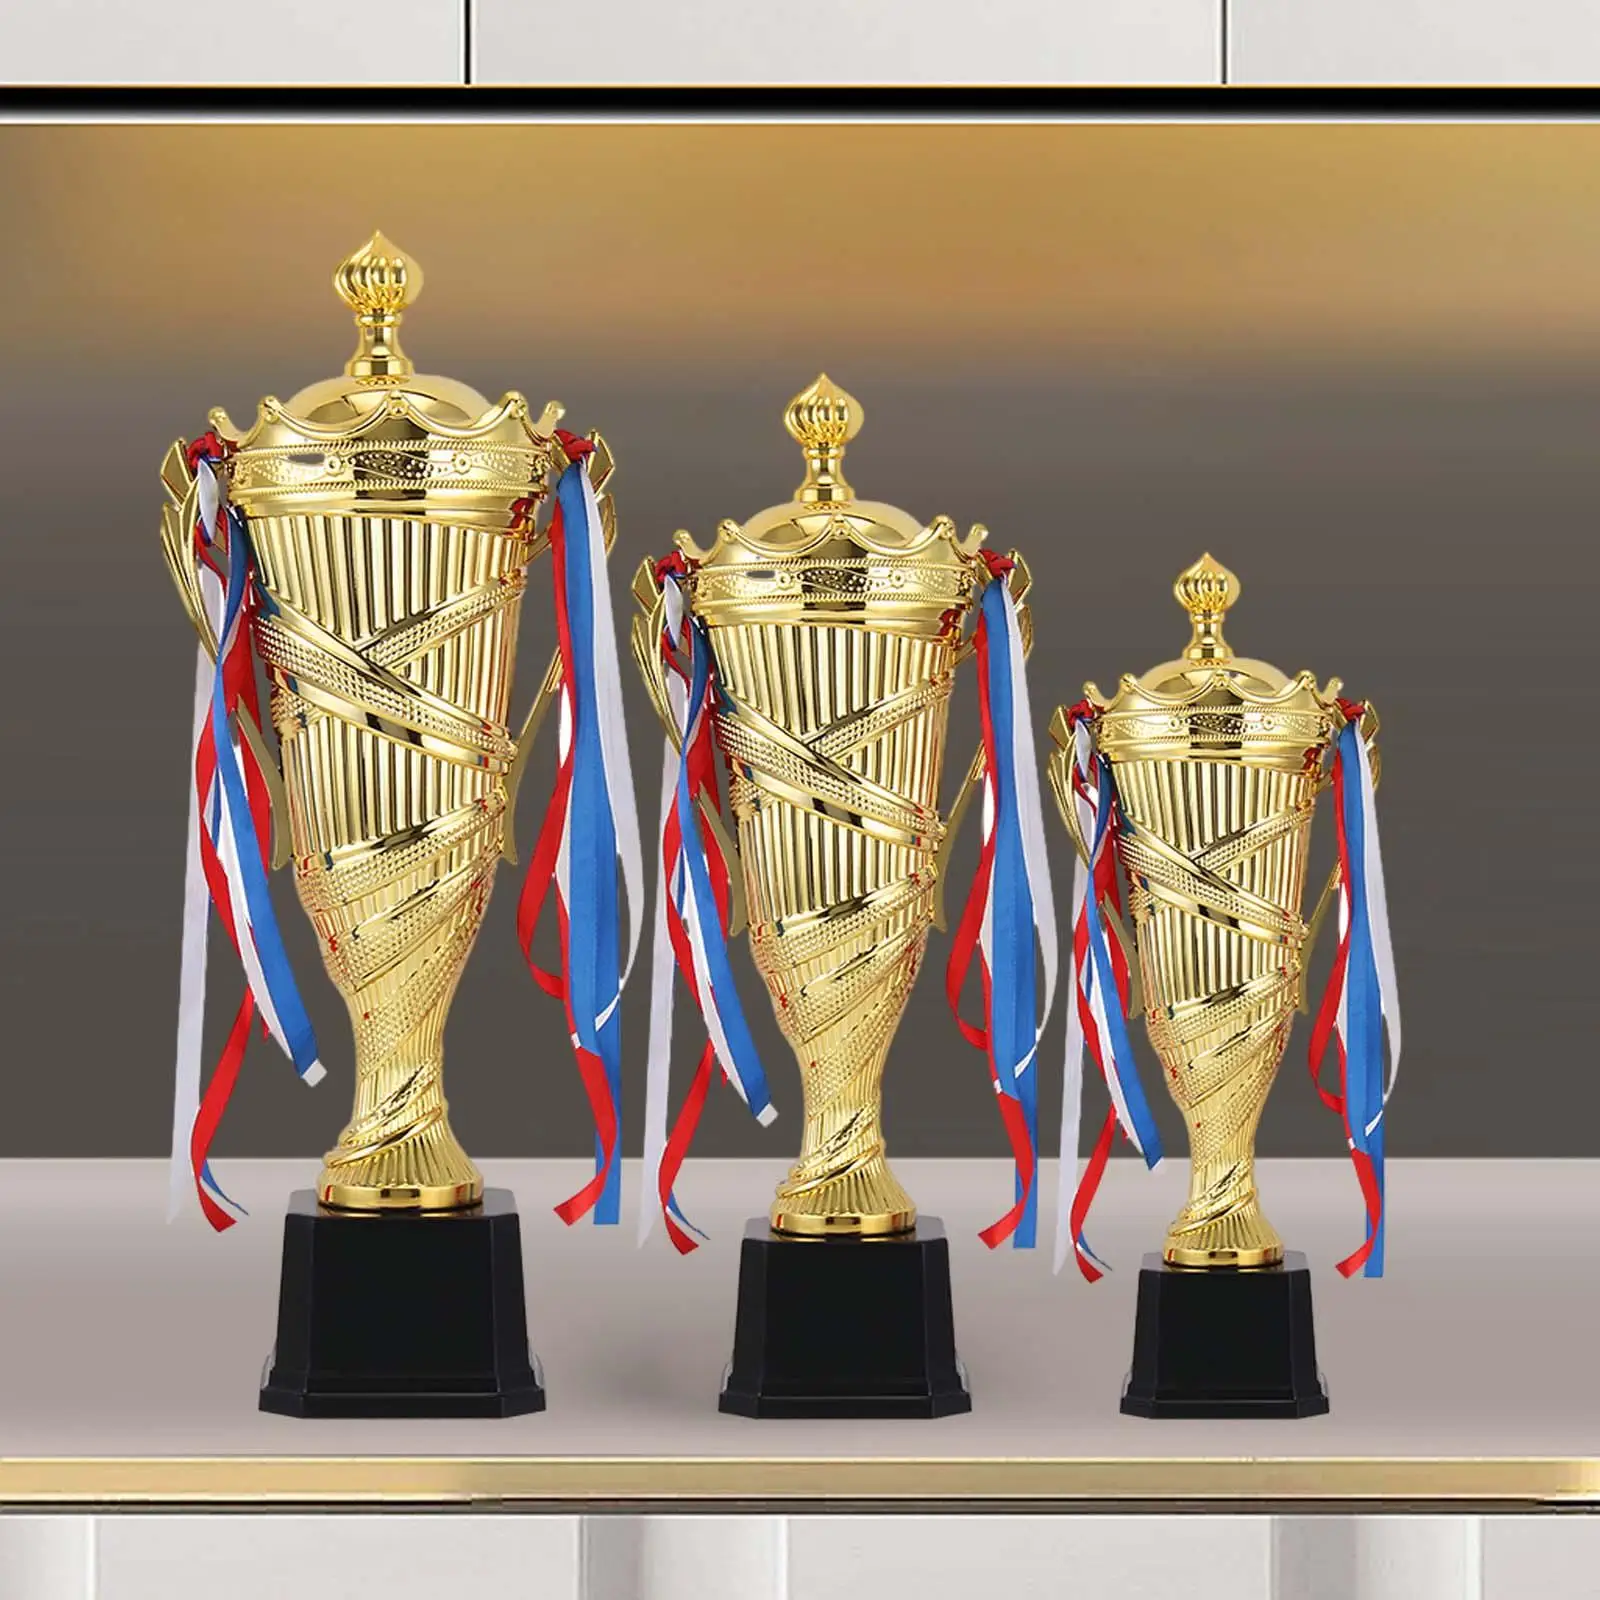 Adults Trophy Achievement Trophy with Lid Trophy for Award Ceremonies Appreciation Gifts Party Favors Rewards Football